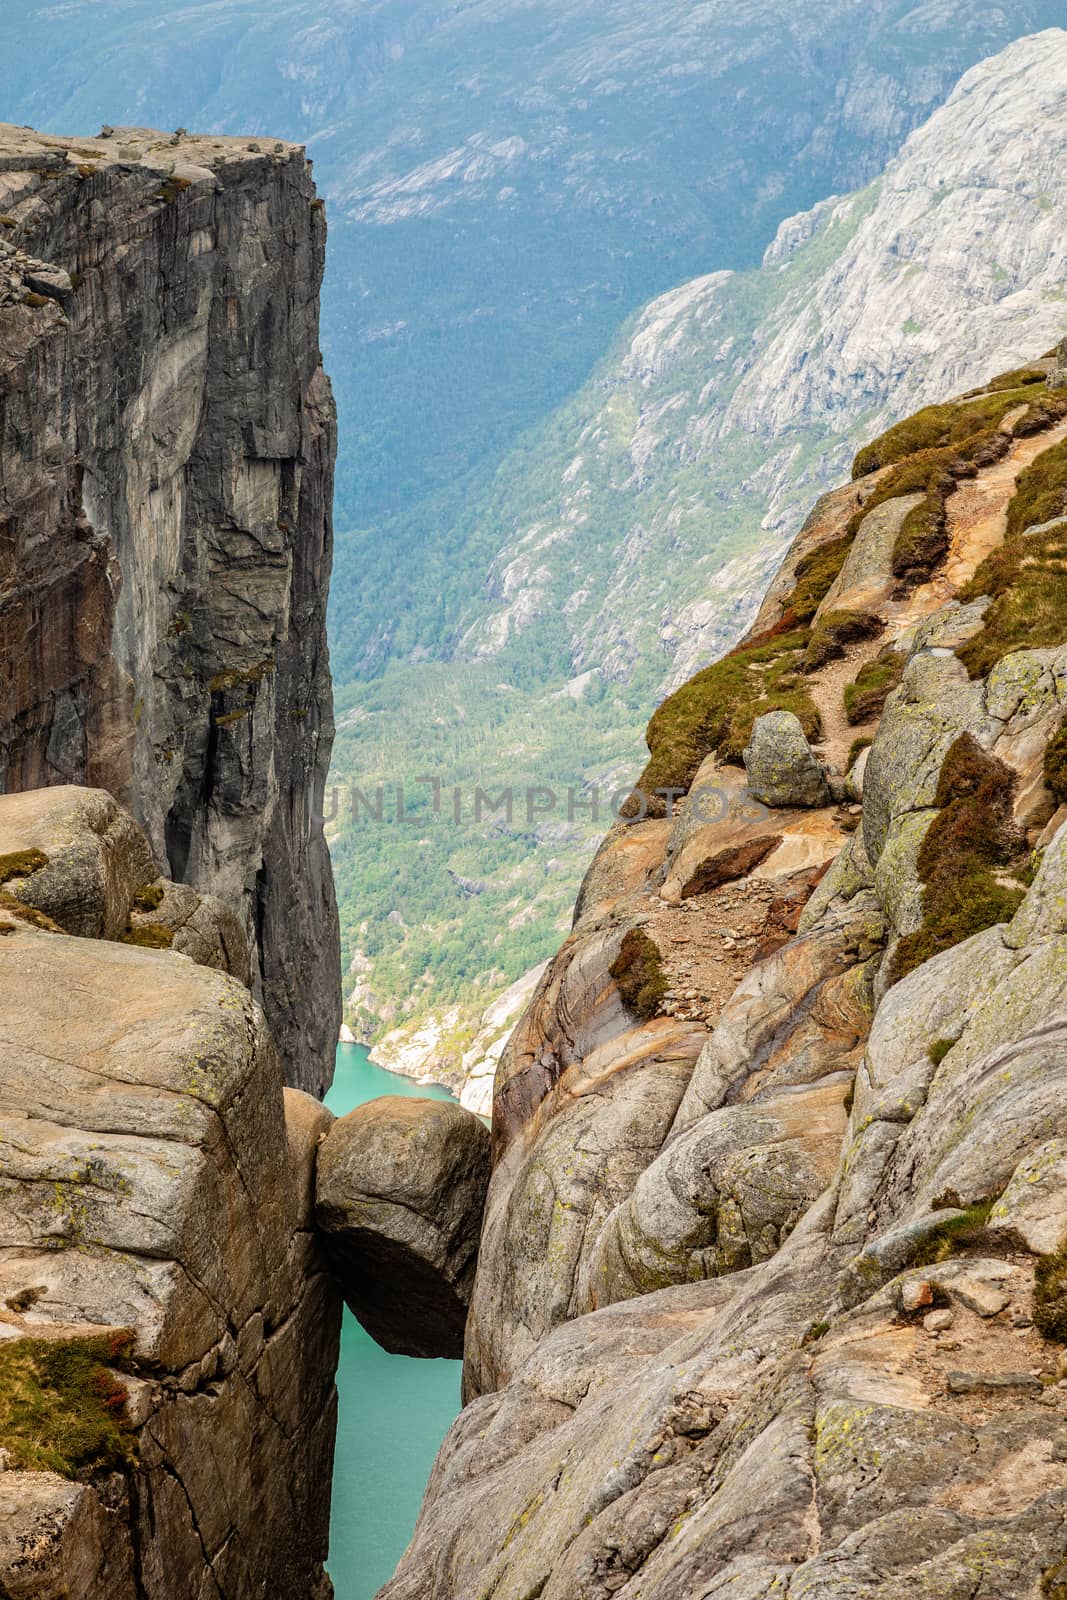 Kjeragbolten, view from the top to the stone stuck between two r by ambeon